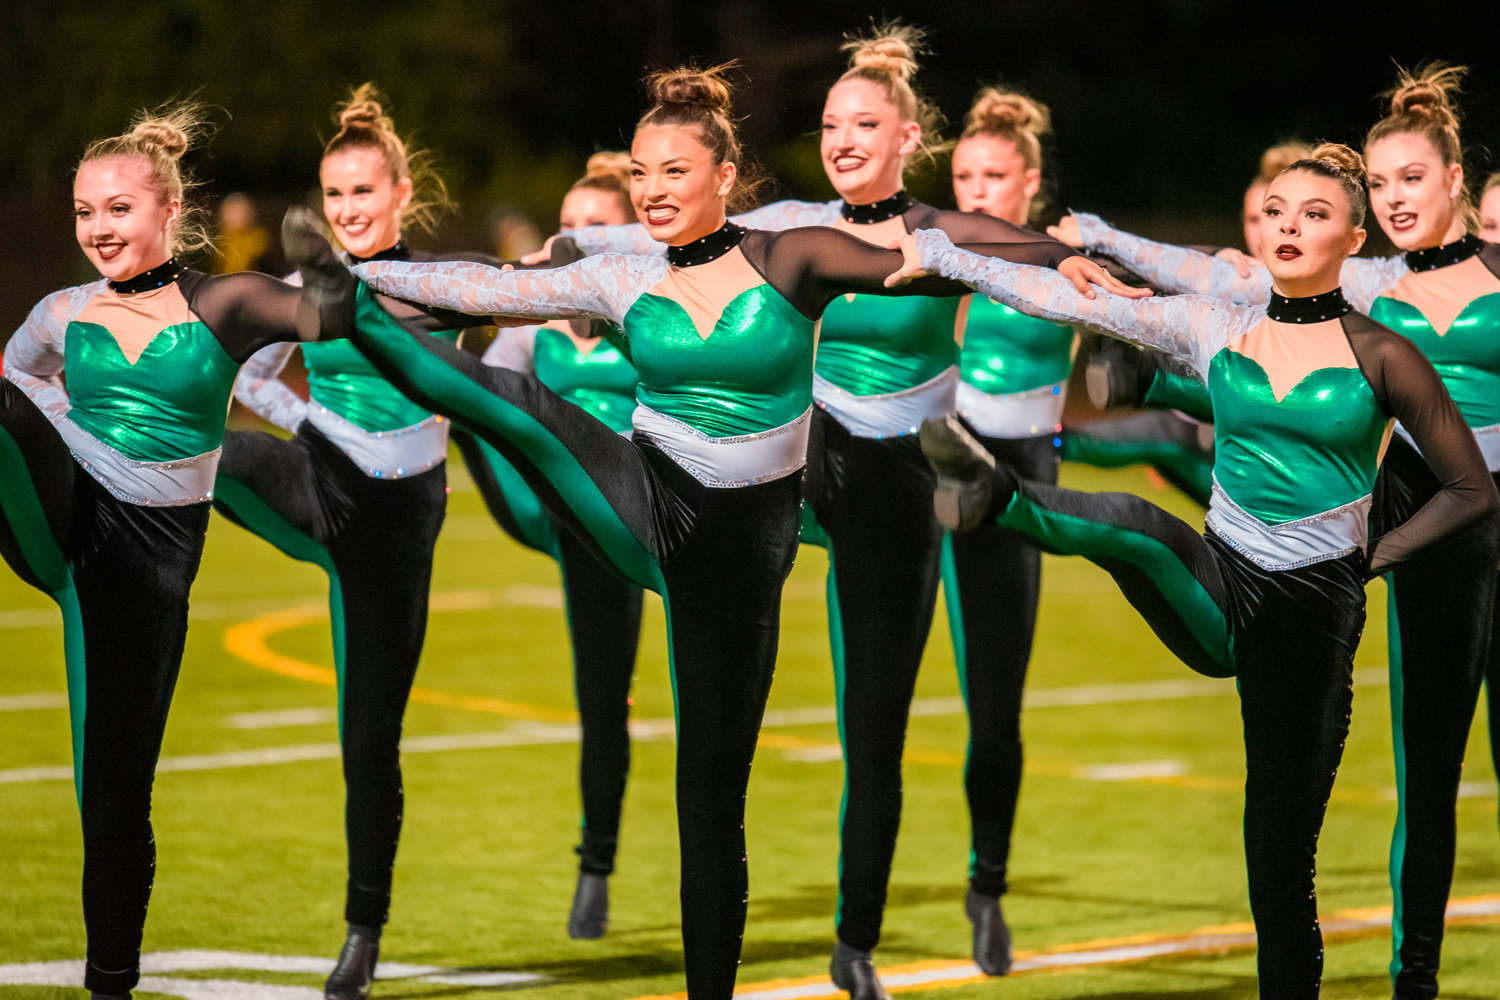 Members of the Tumwater Dance Team perform on the field at halftime under Friday night lights.